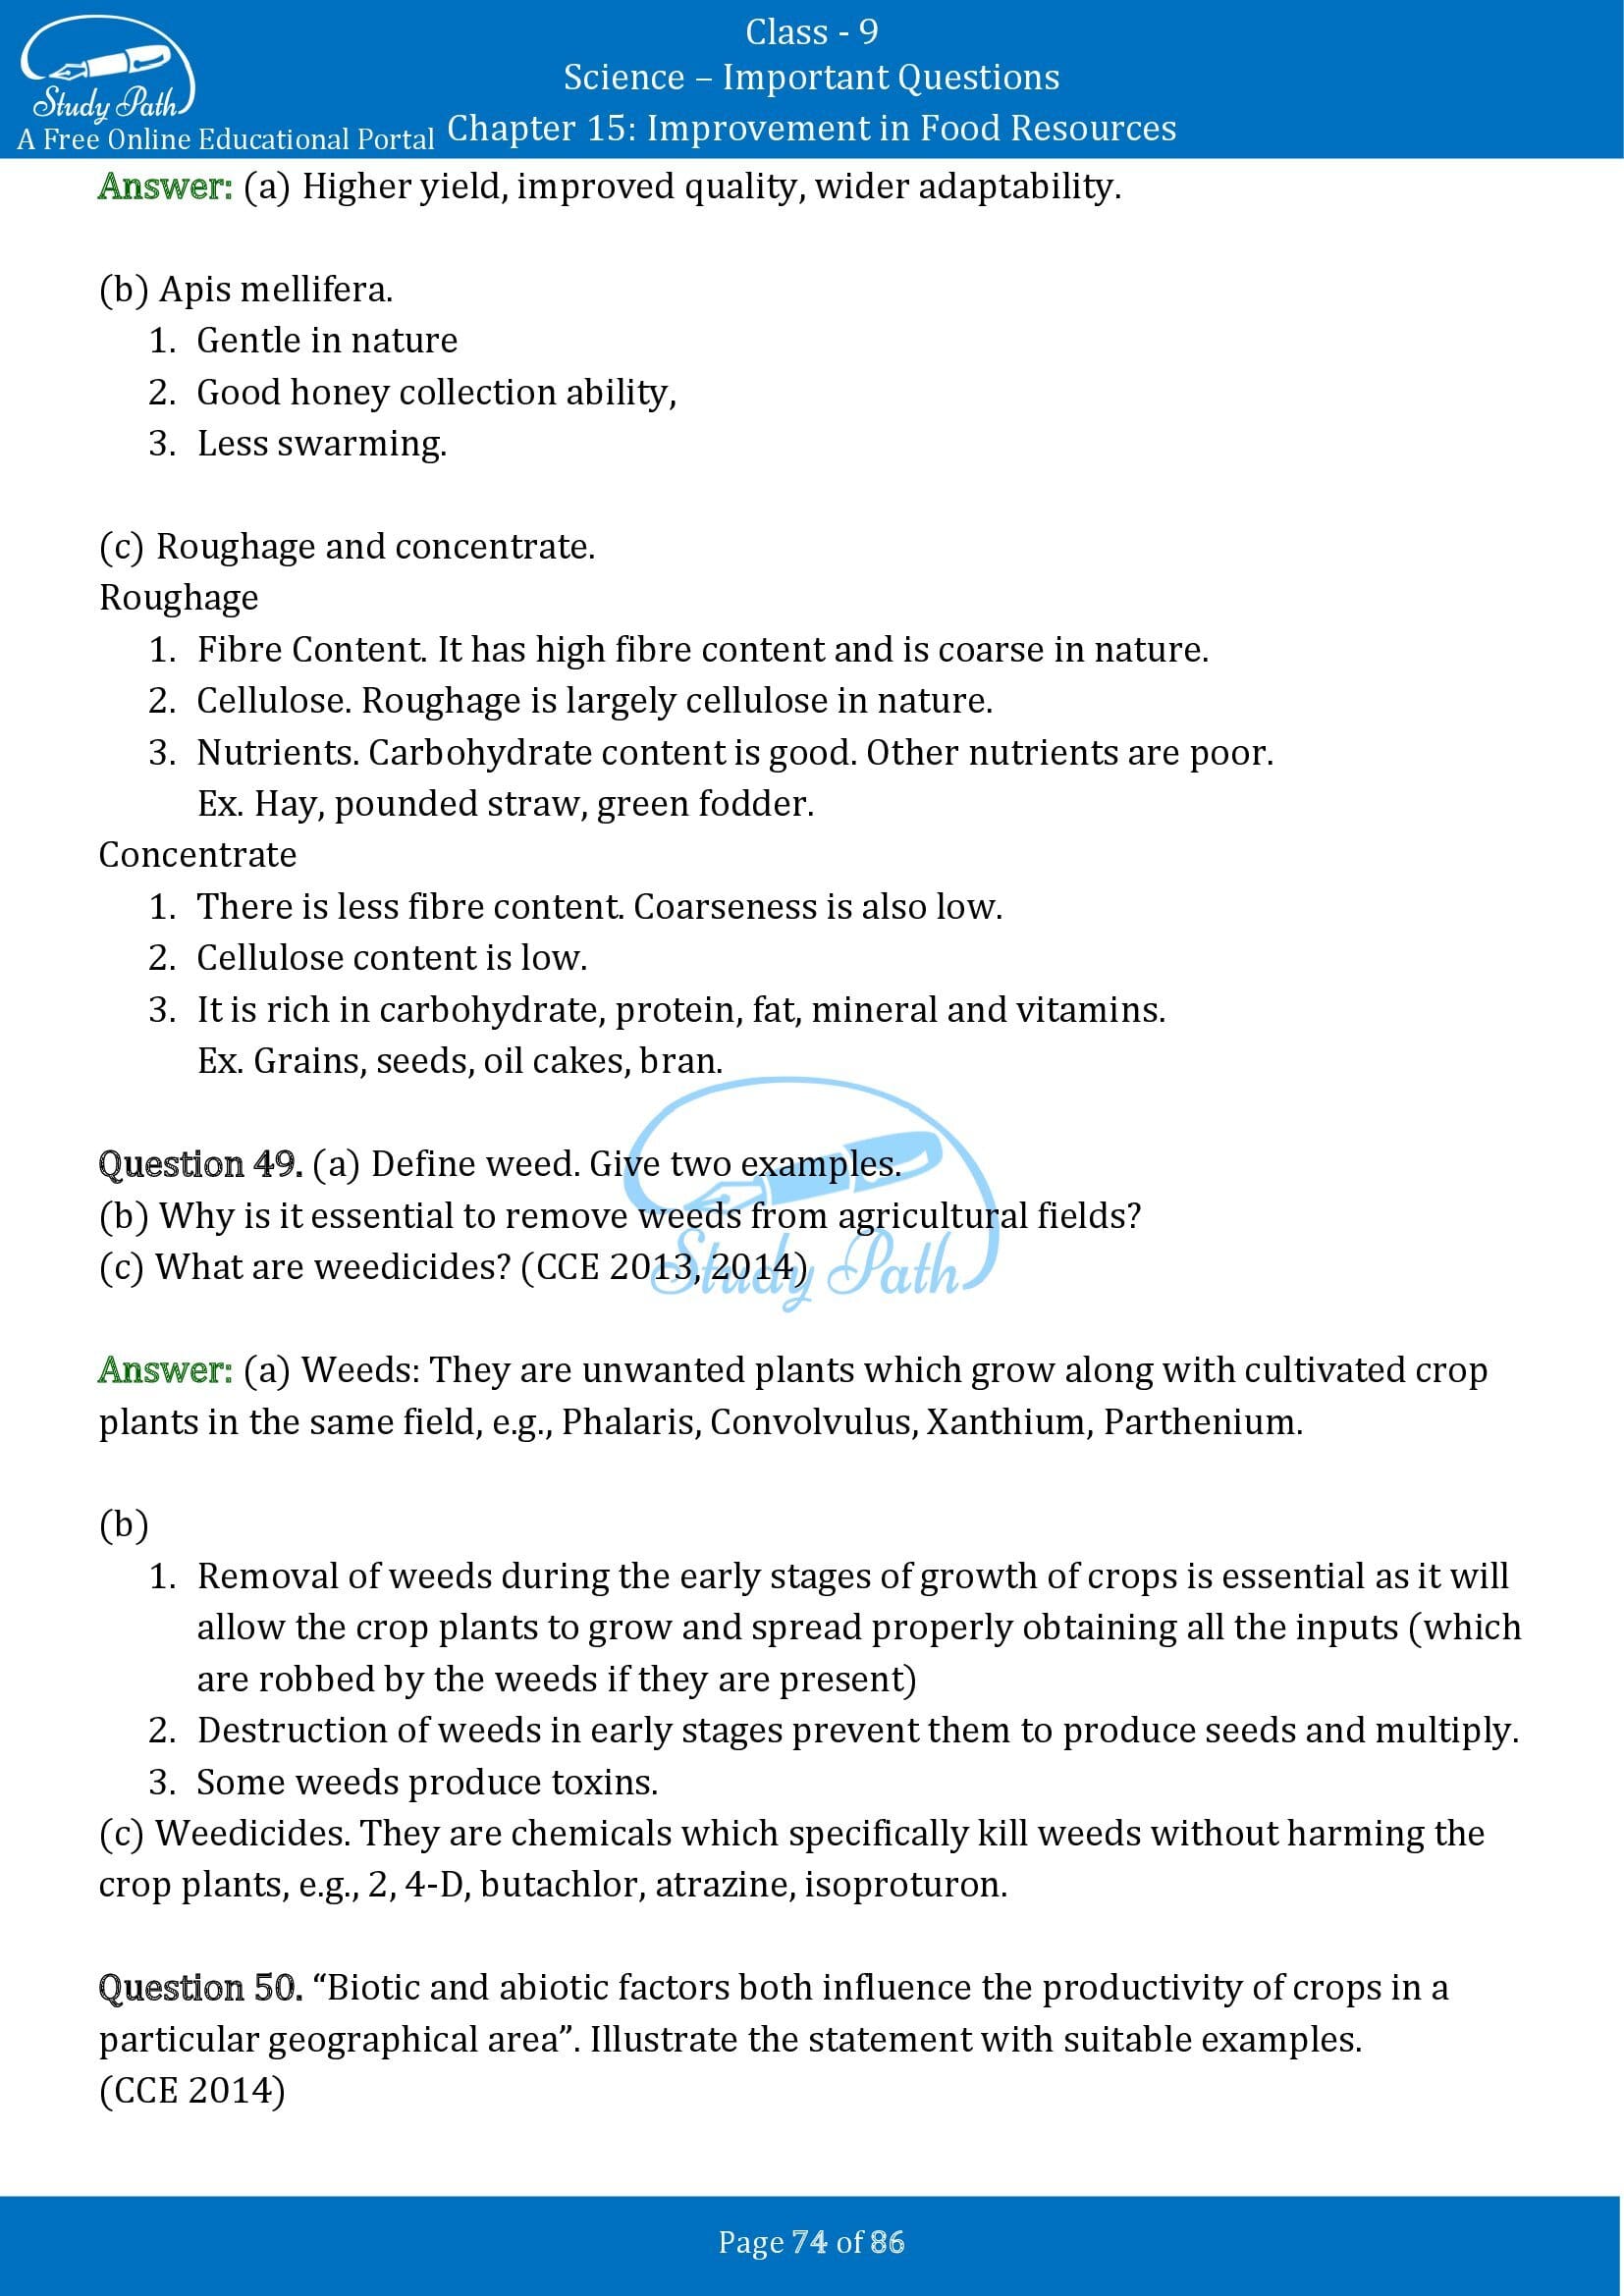 Important Questions for Class 9 Science Chapter 15 Improvement in Food Resources 00074